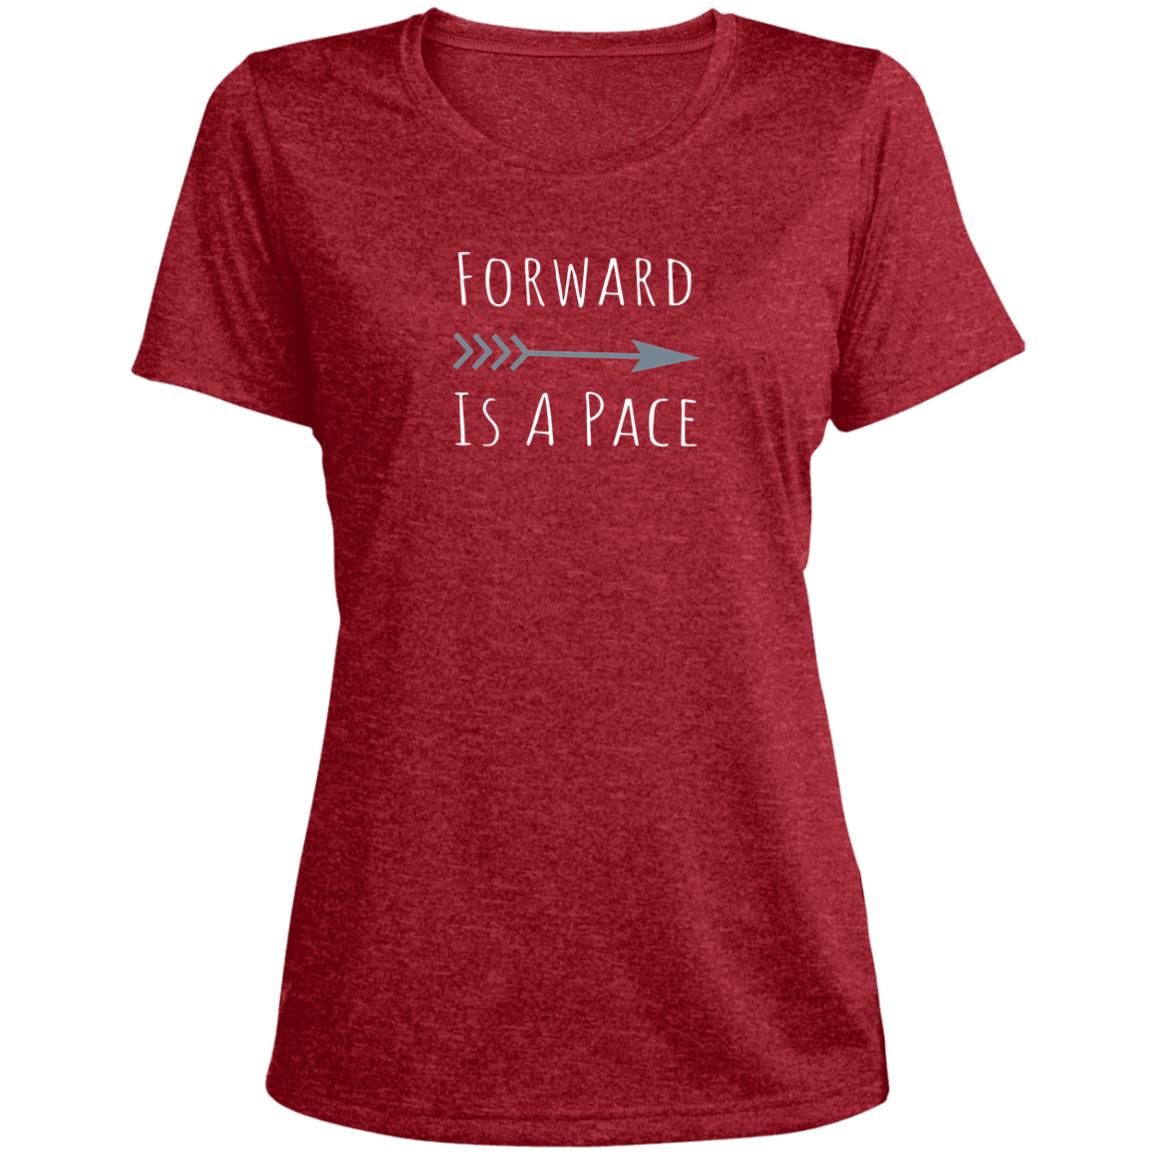 Forward is a pace Women's Performance Tee